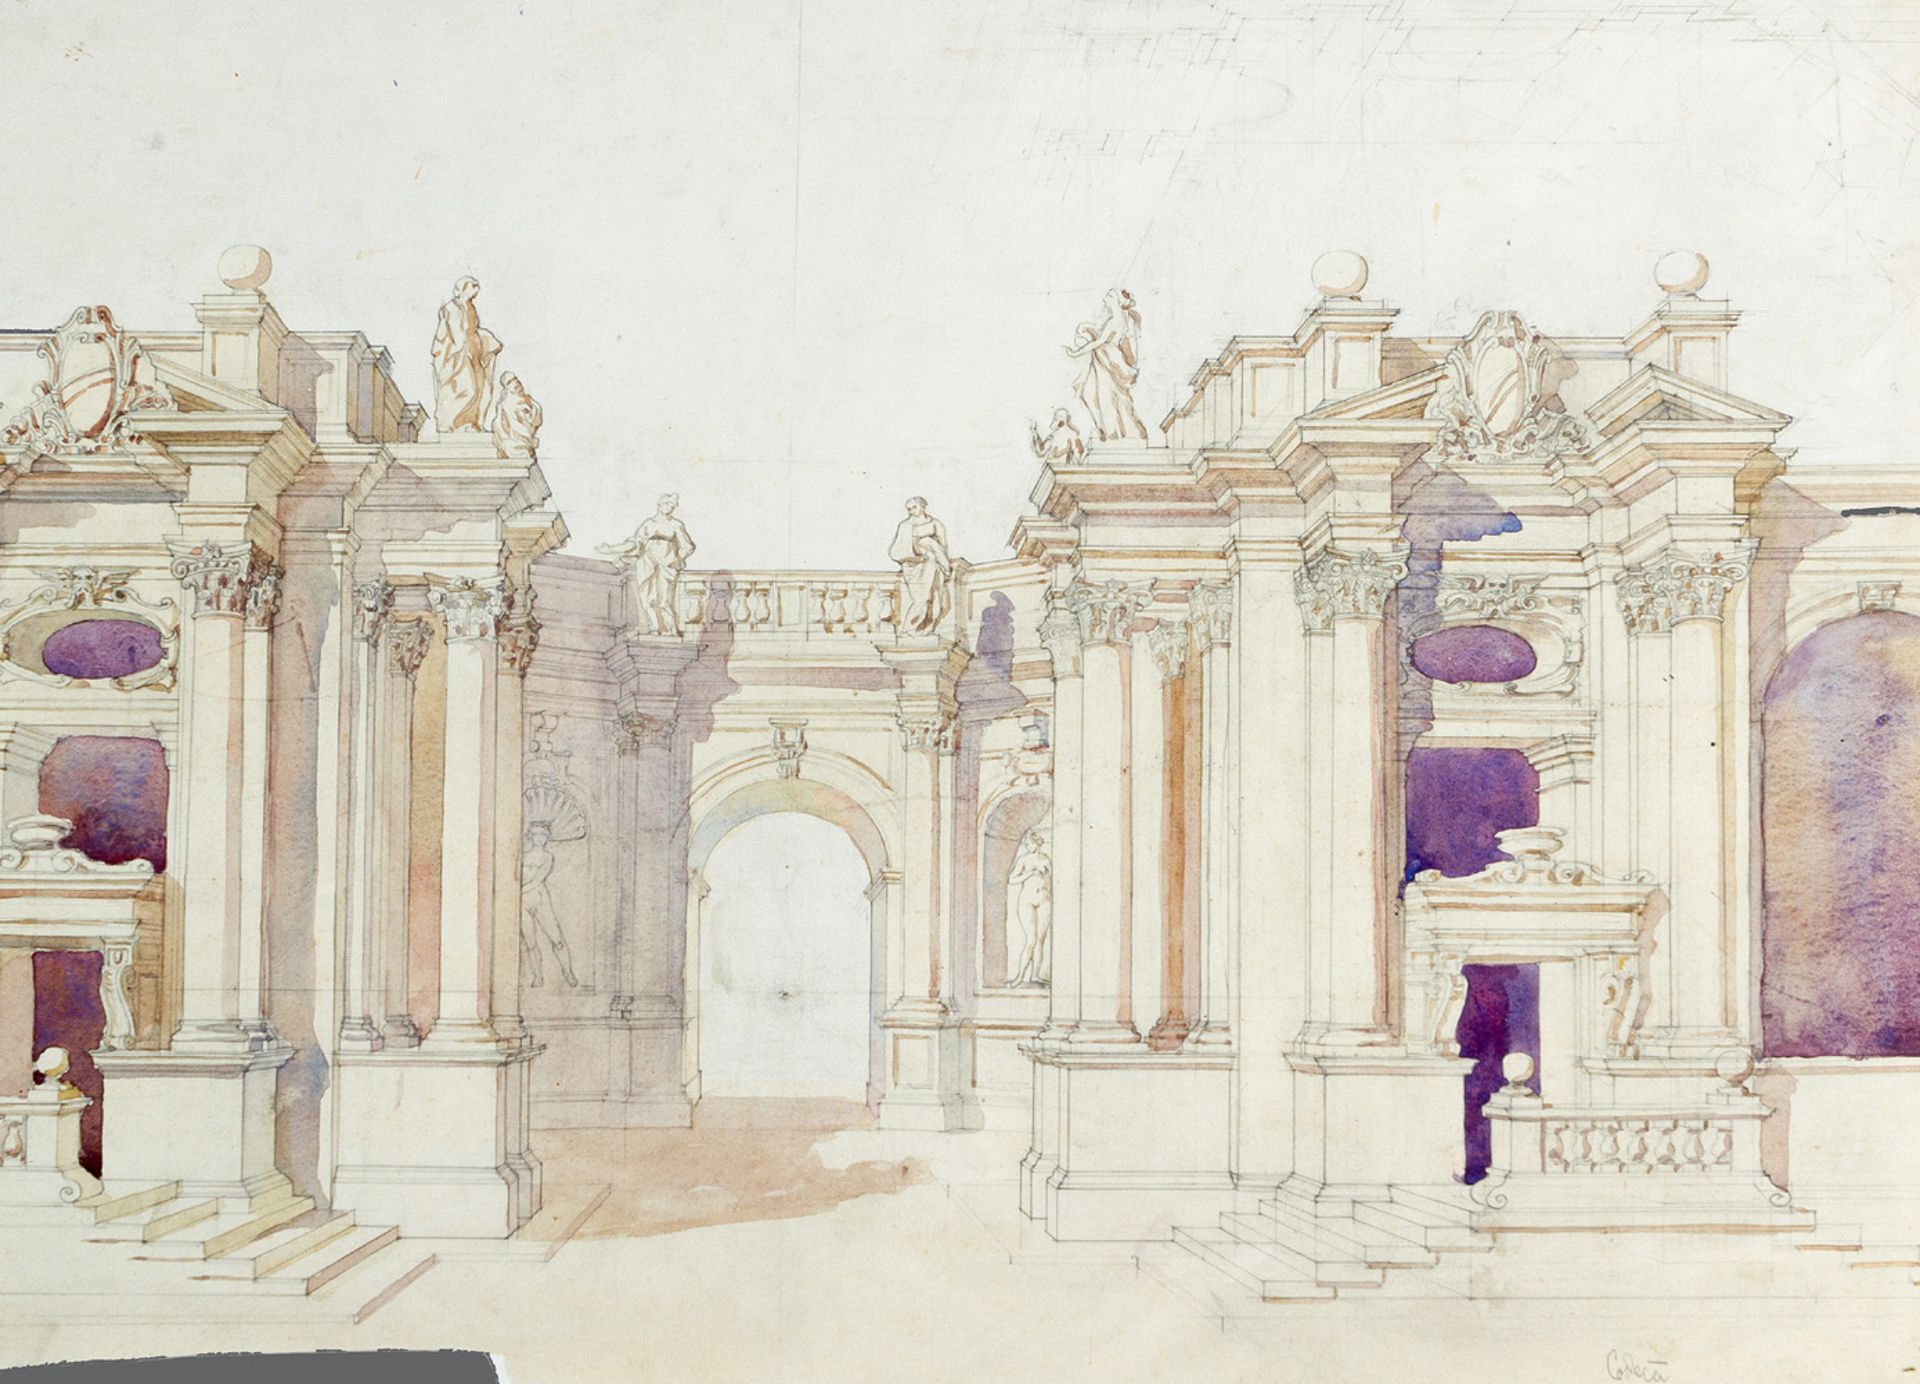 Architectural drawing - Image 2 of 3